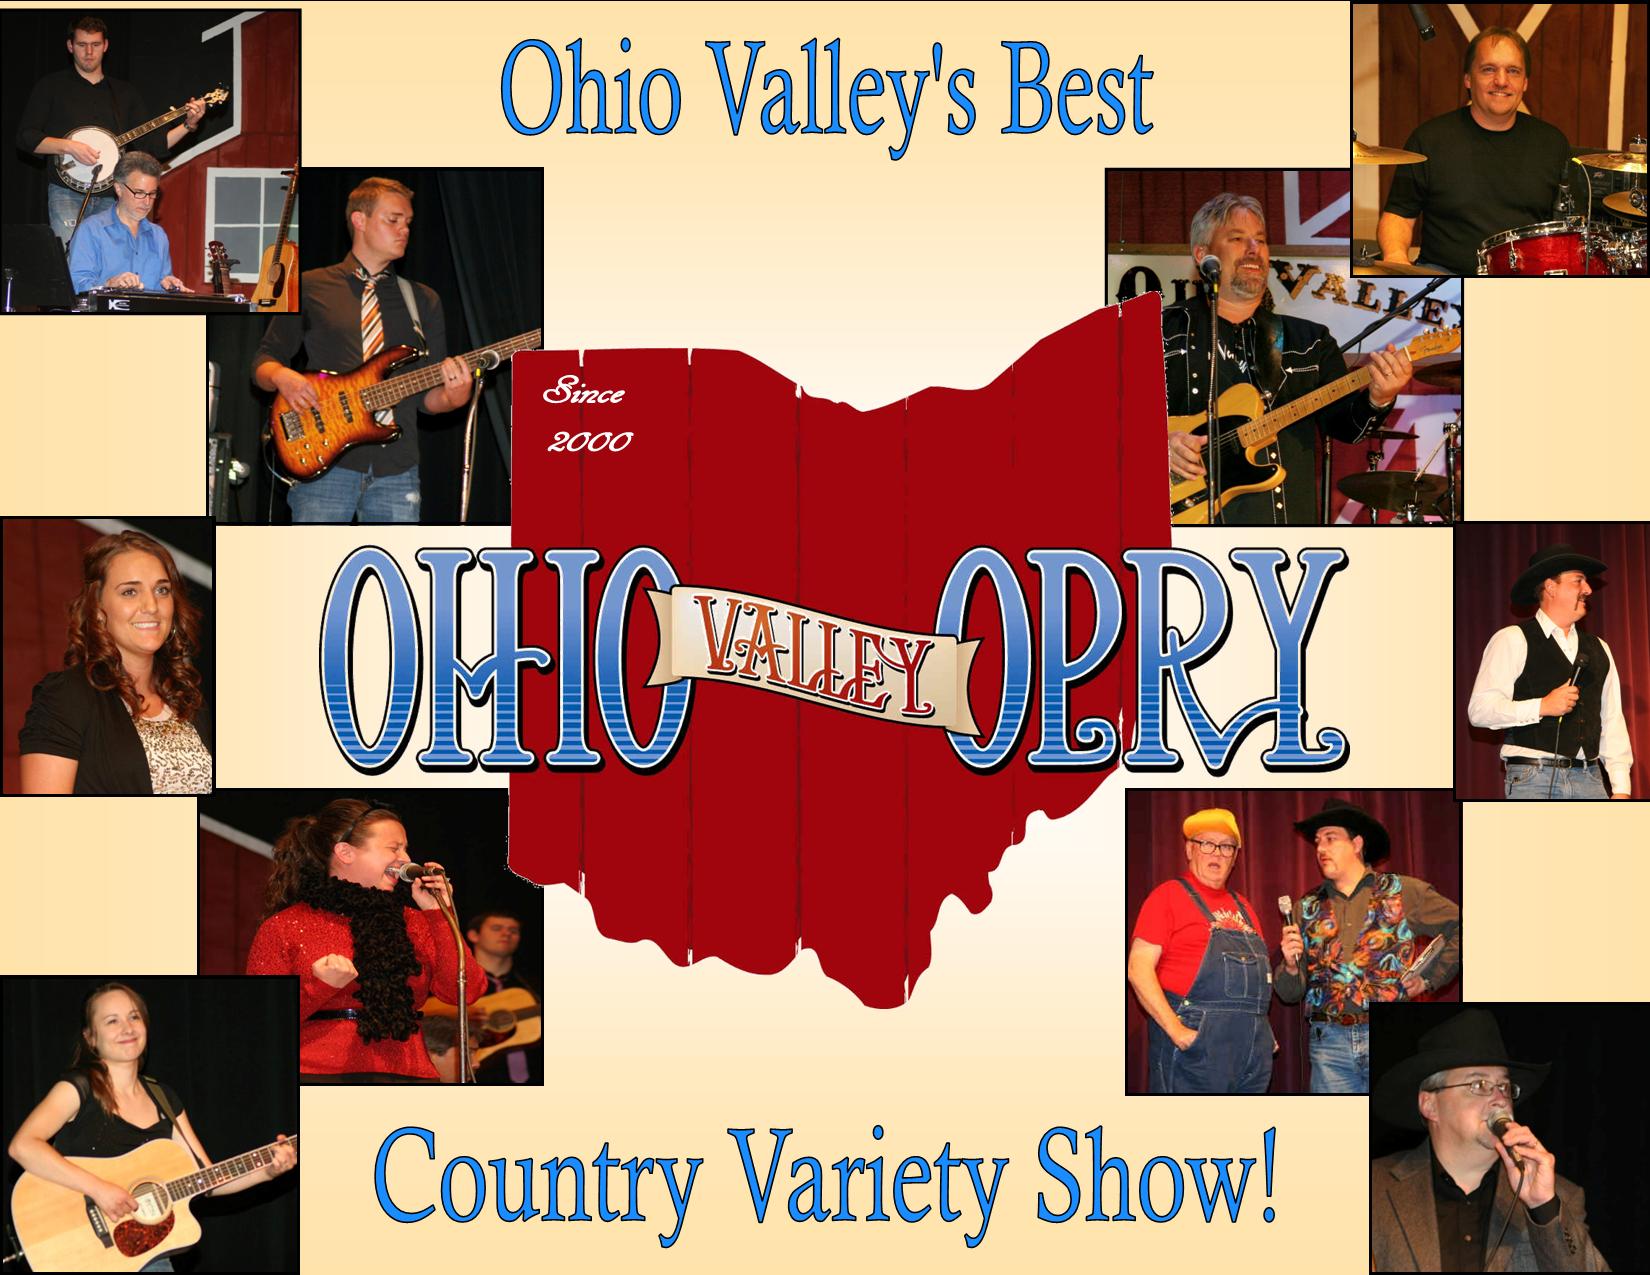 Ohio Valley Opry - Peoples Bank Theatre